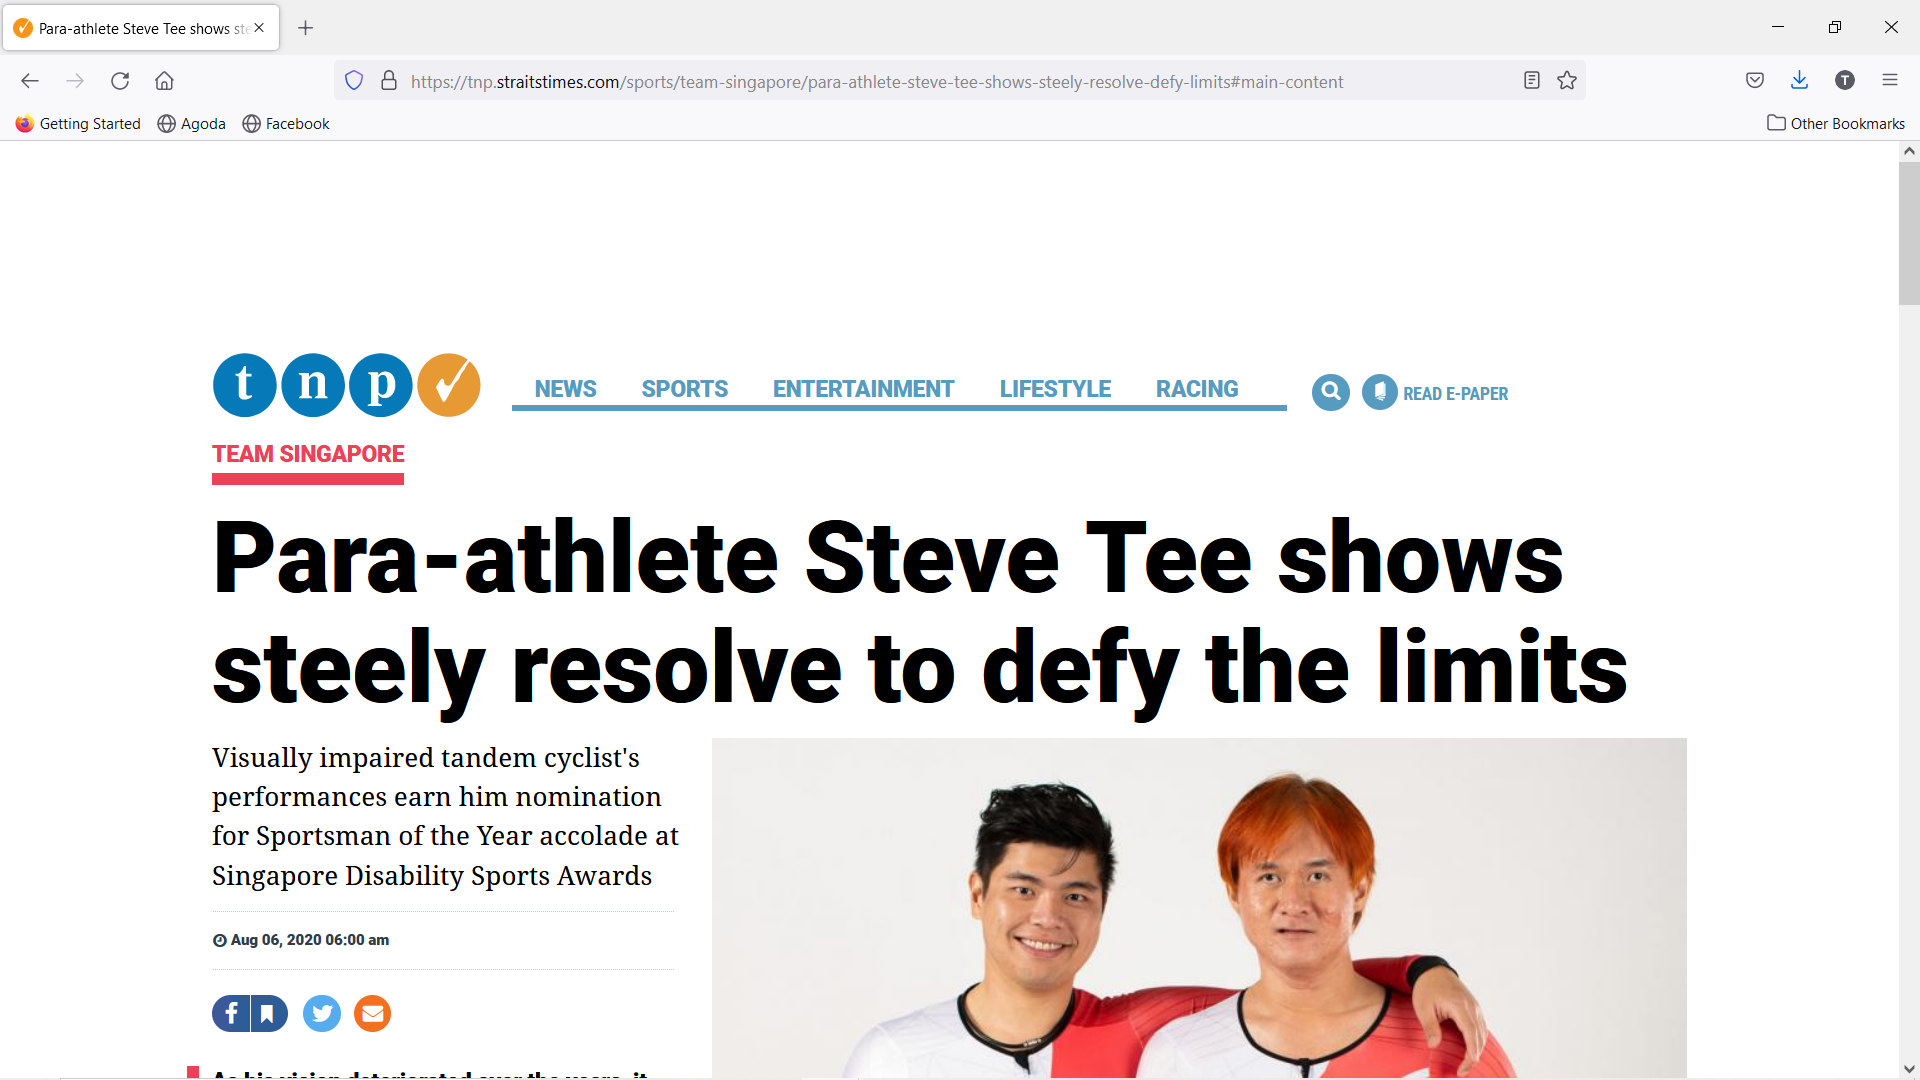 Para-athlete Steve Tee shows steely resolve to defy the limits Screenshot